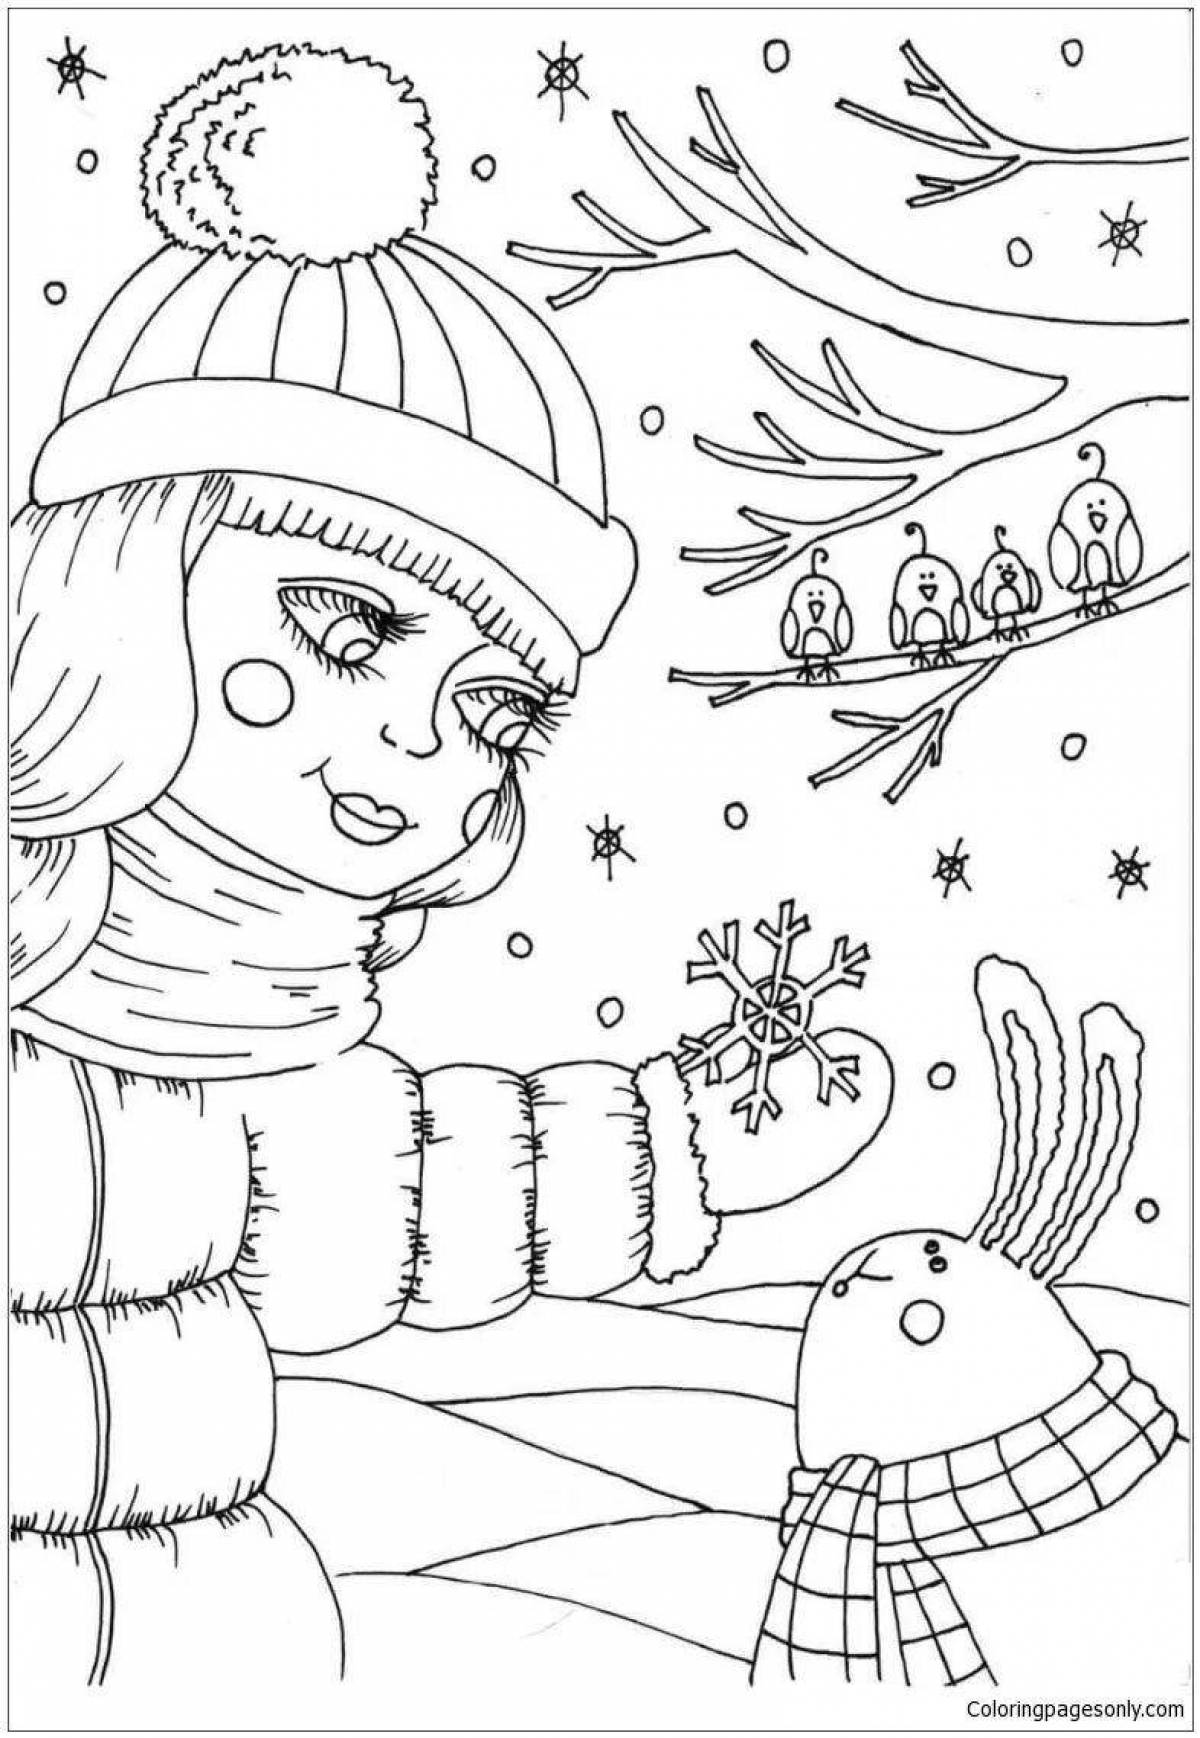 Charming February coloring book